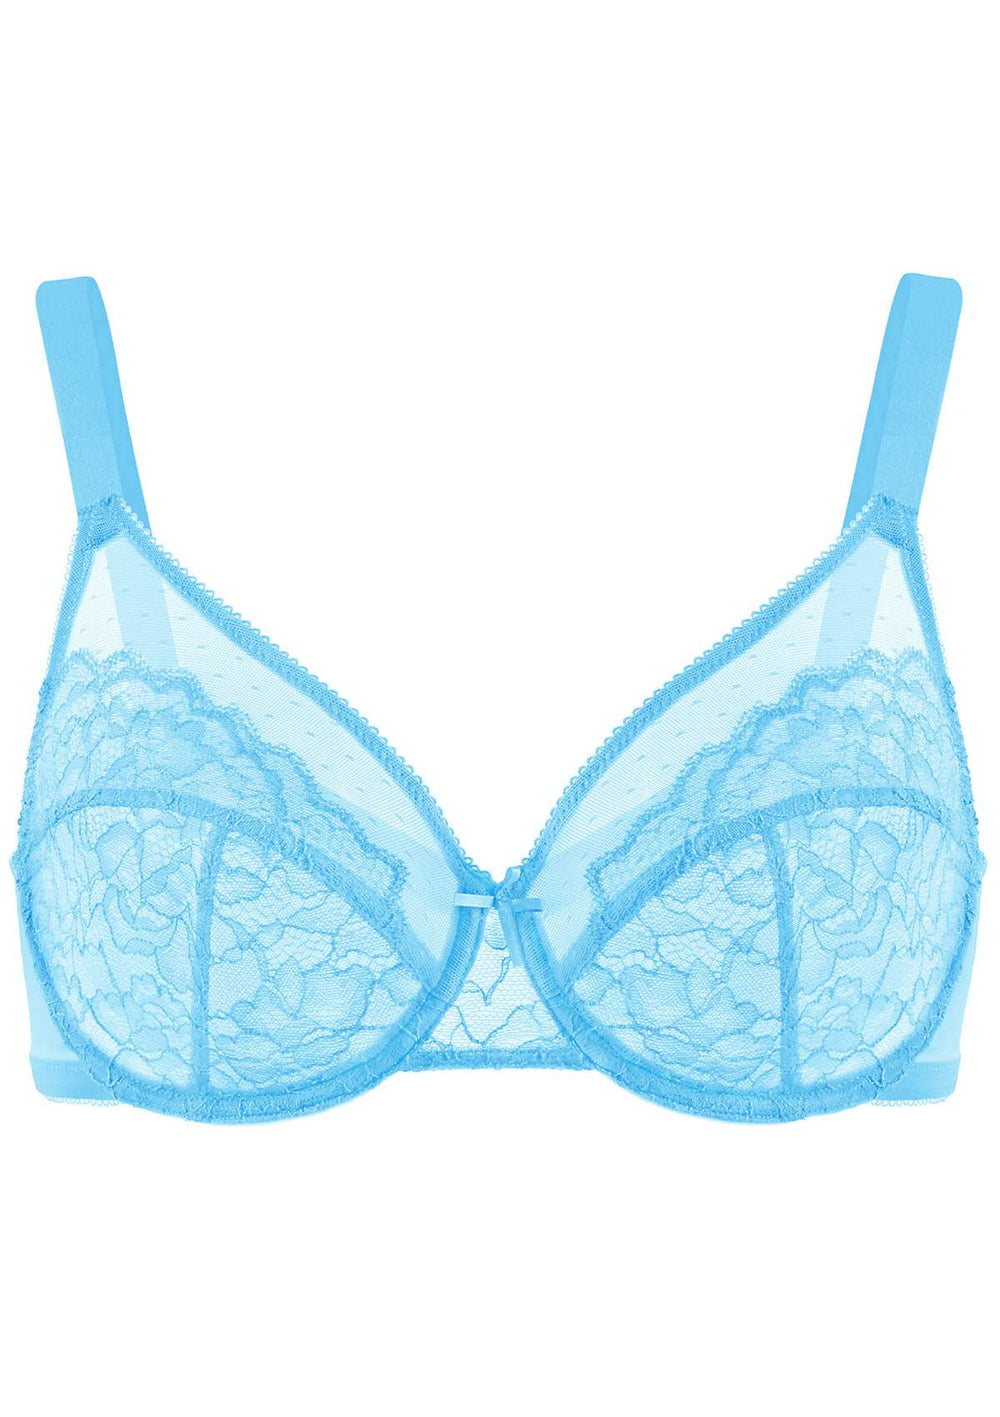 HSIA Enchante Minimizer Lace Bra: Full Support for Heavy Breasts